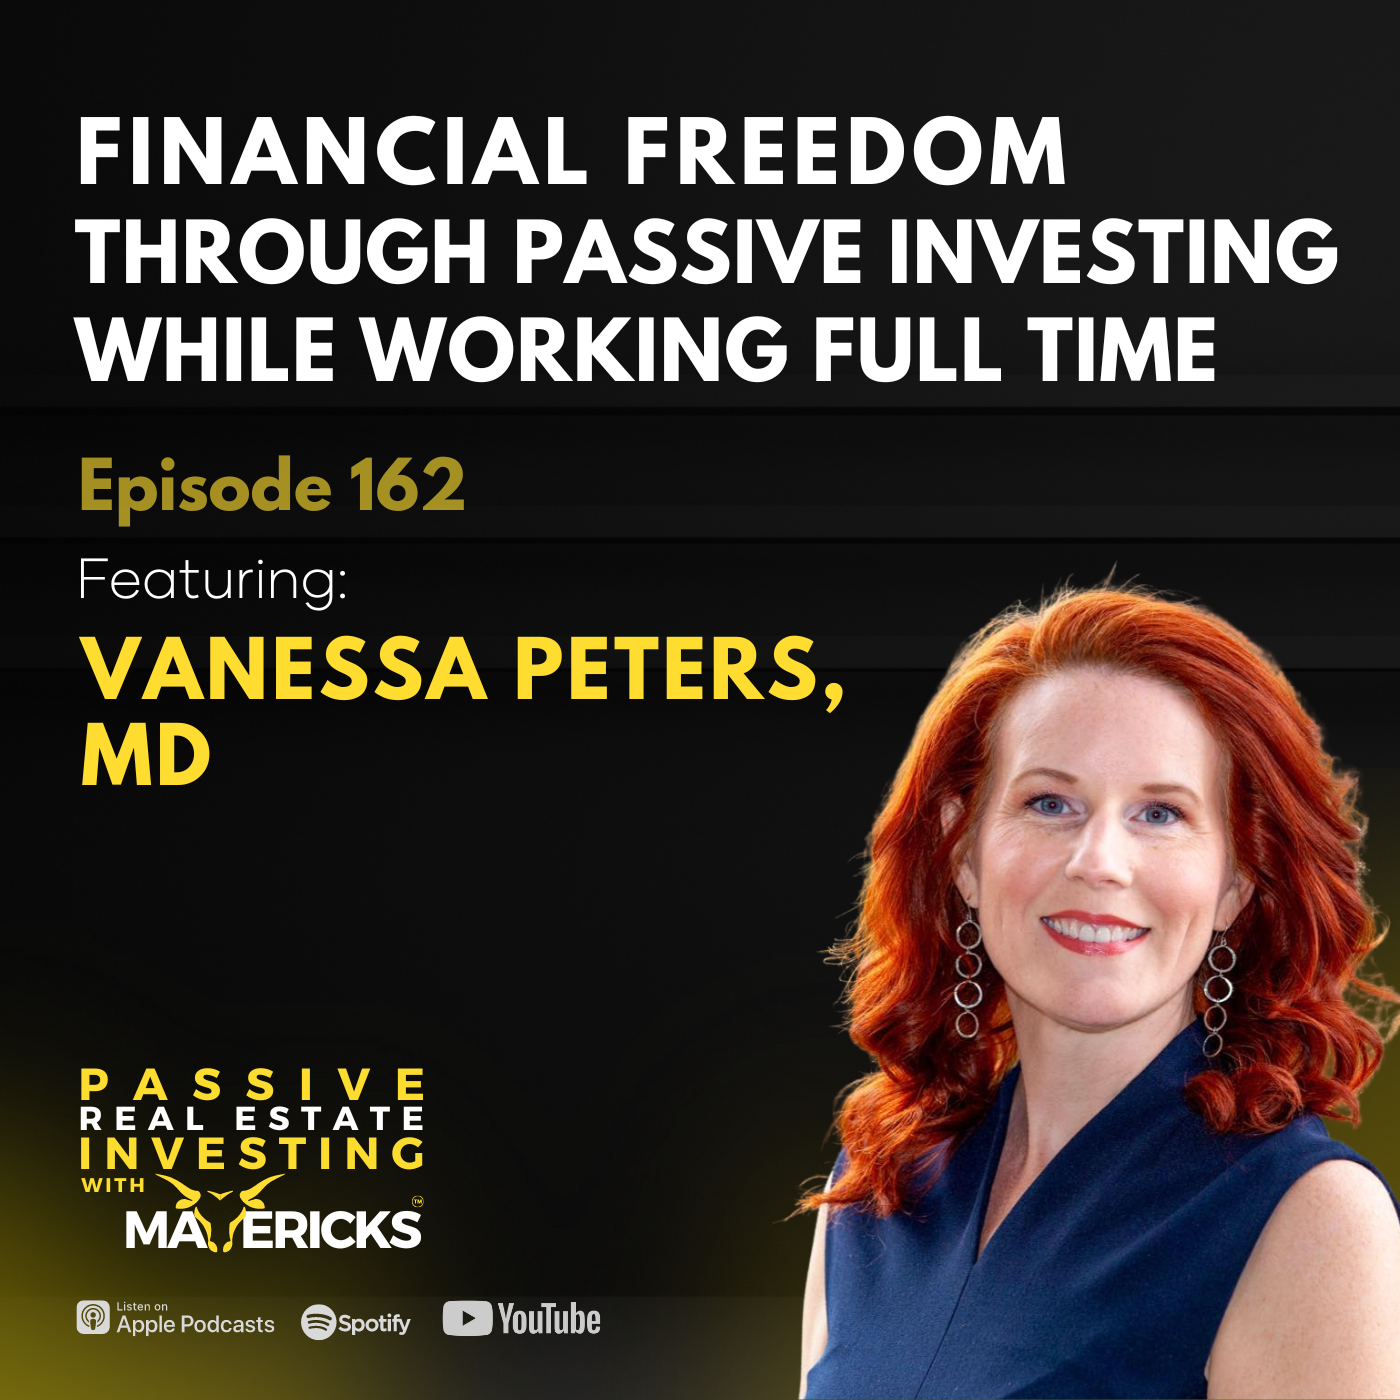 Financial Freedom through Passive Investing while working full-time podcast promo image